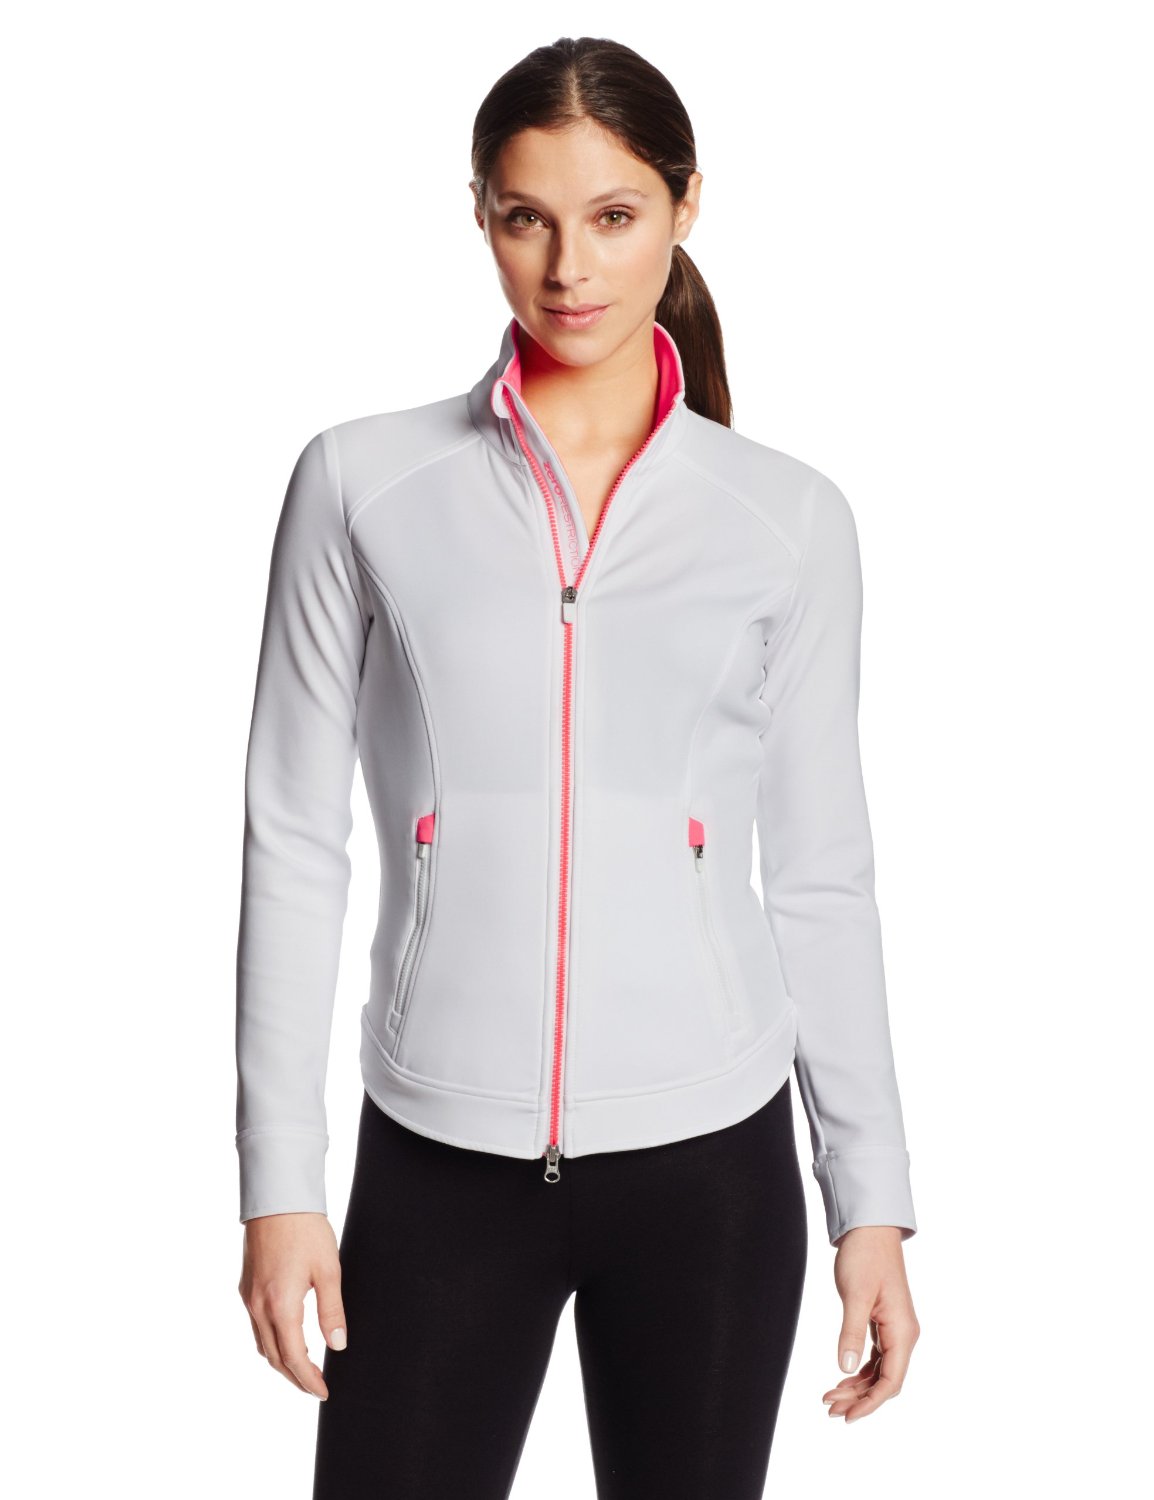 Buy Zero Restriction Womens Golf Pullovers for Best Prices Online!